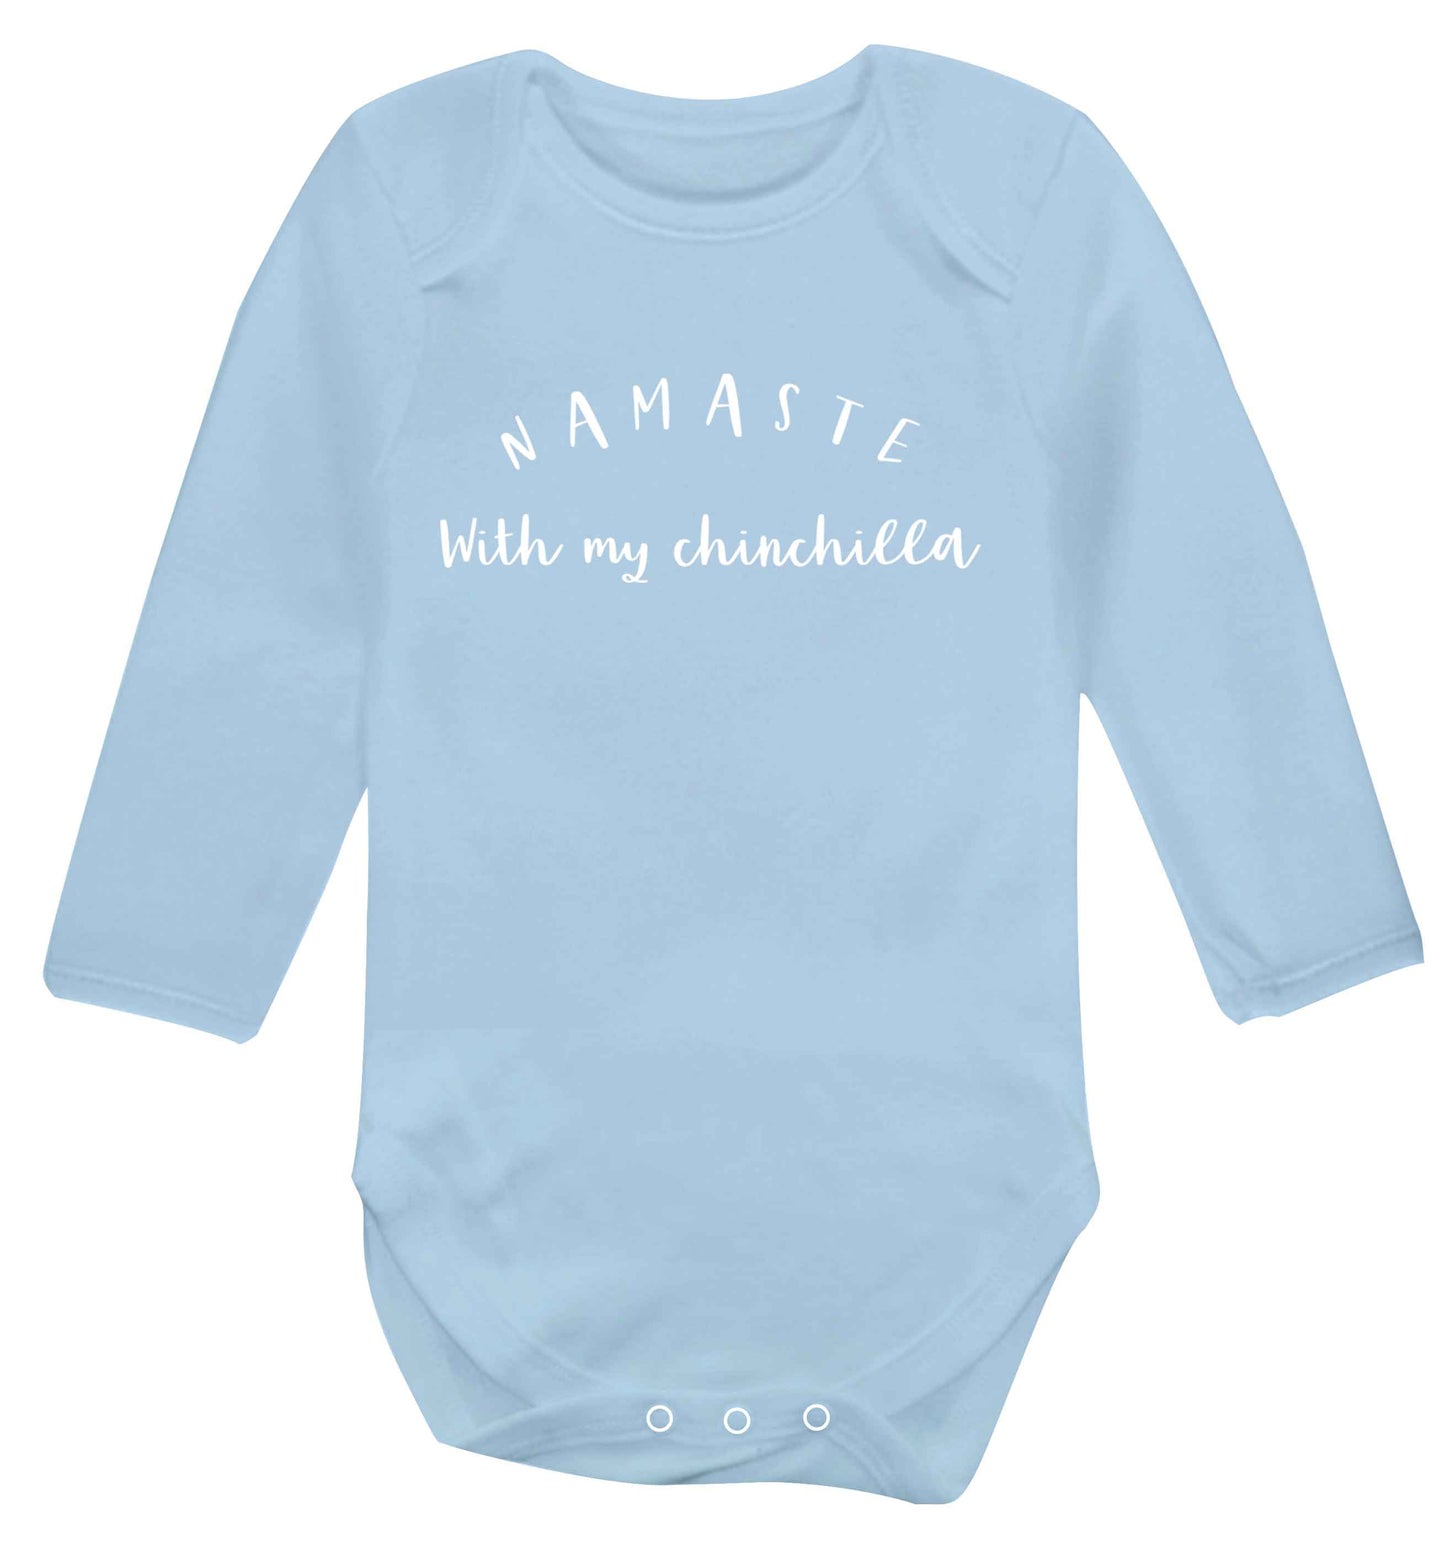 Namaste with my chinchilla Baby Vest long sleeved pale blue 6-12 months